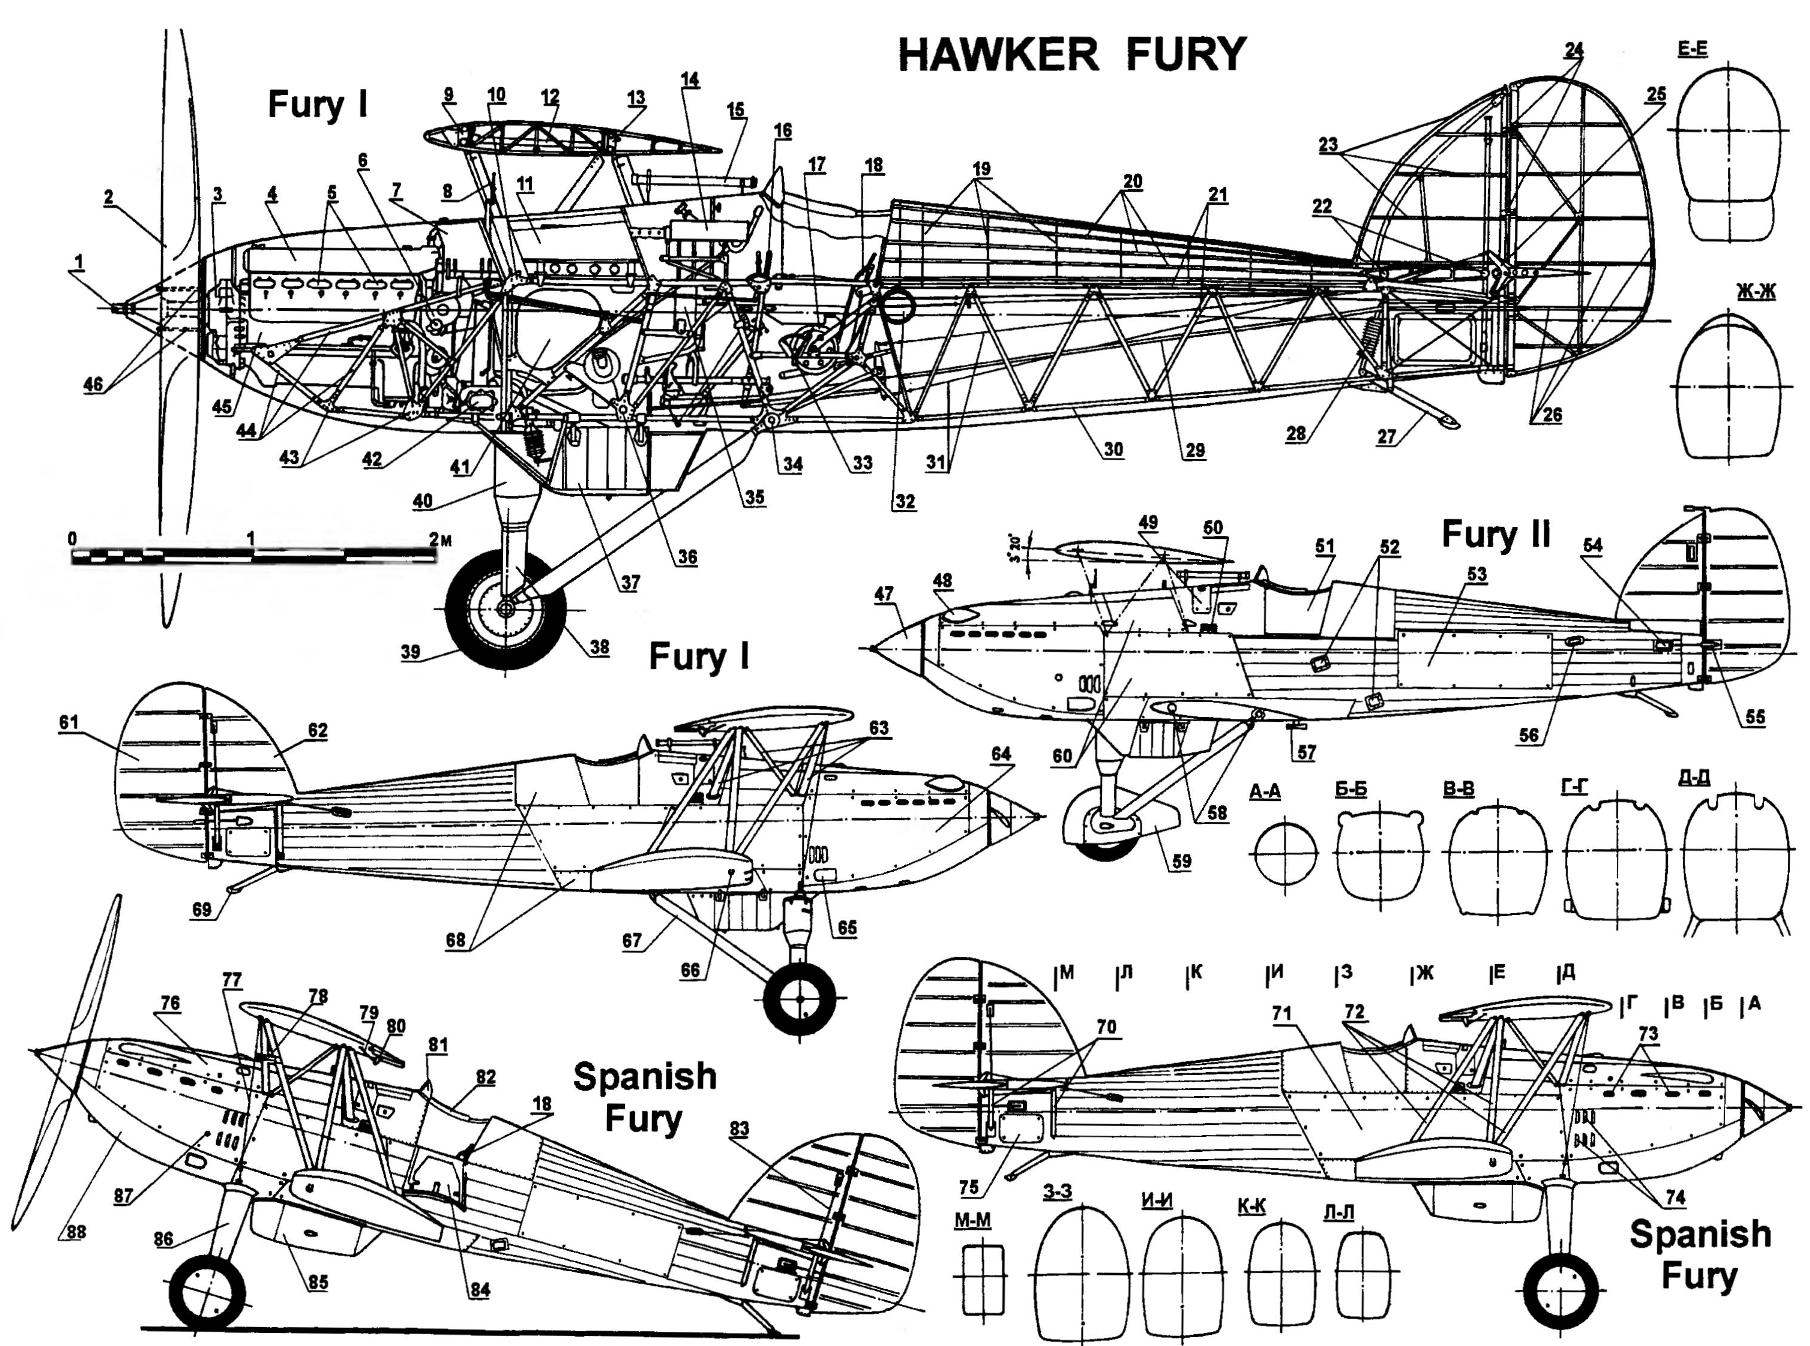 Fighter-Hawker FURY byplay